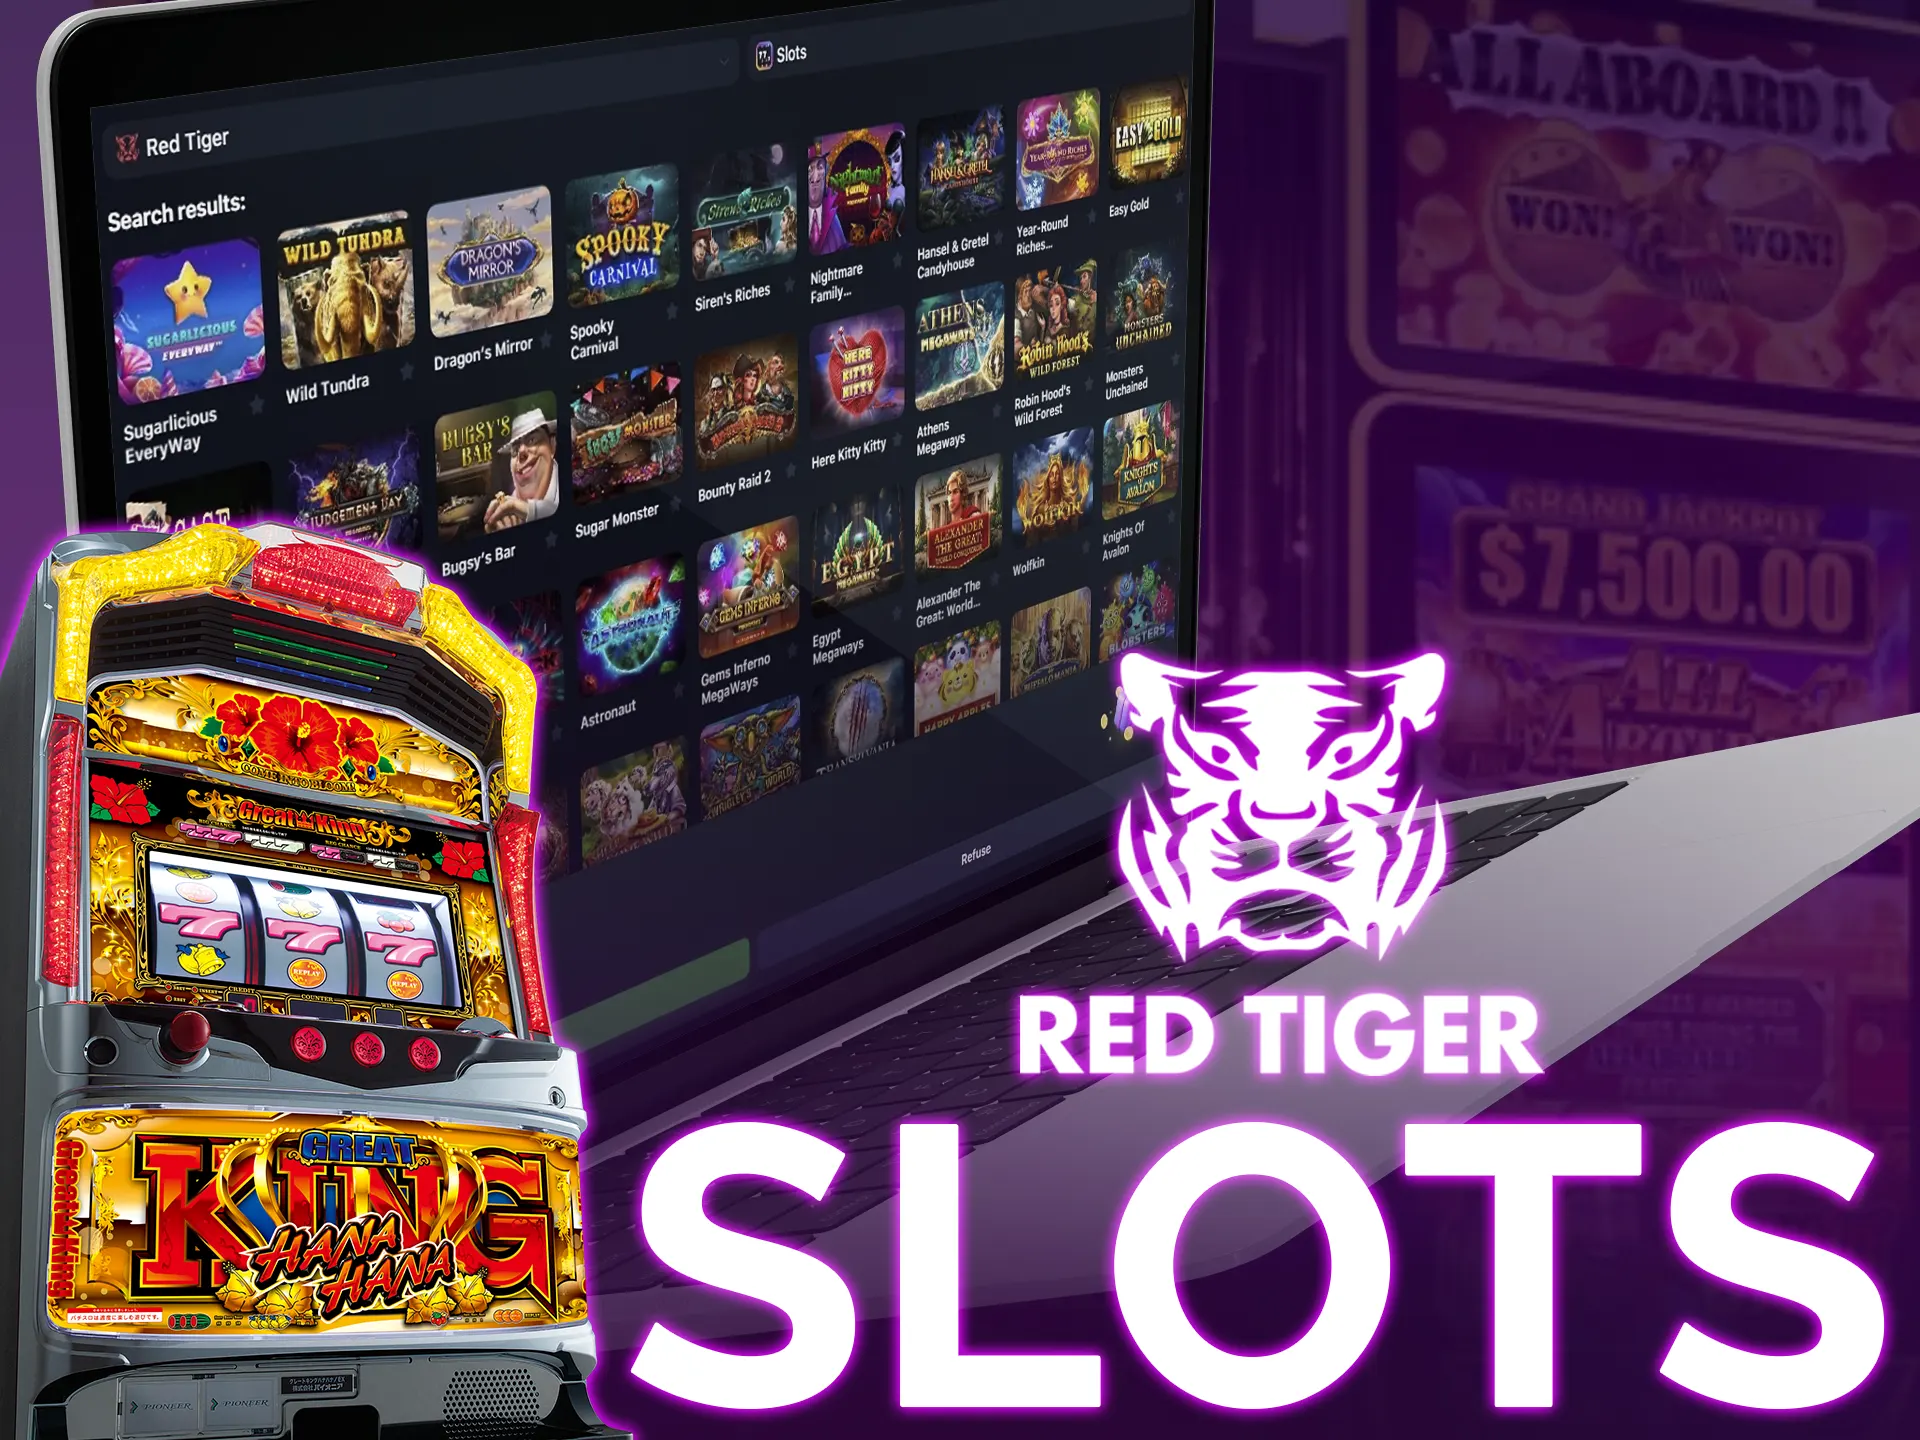 Red Tiger offers a diverse range of casino games, including classic and video slots with modern graphics, jackpots, and free spins.